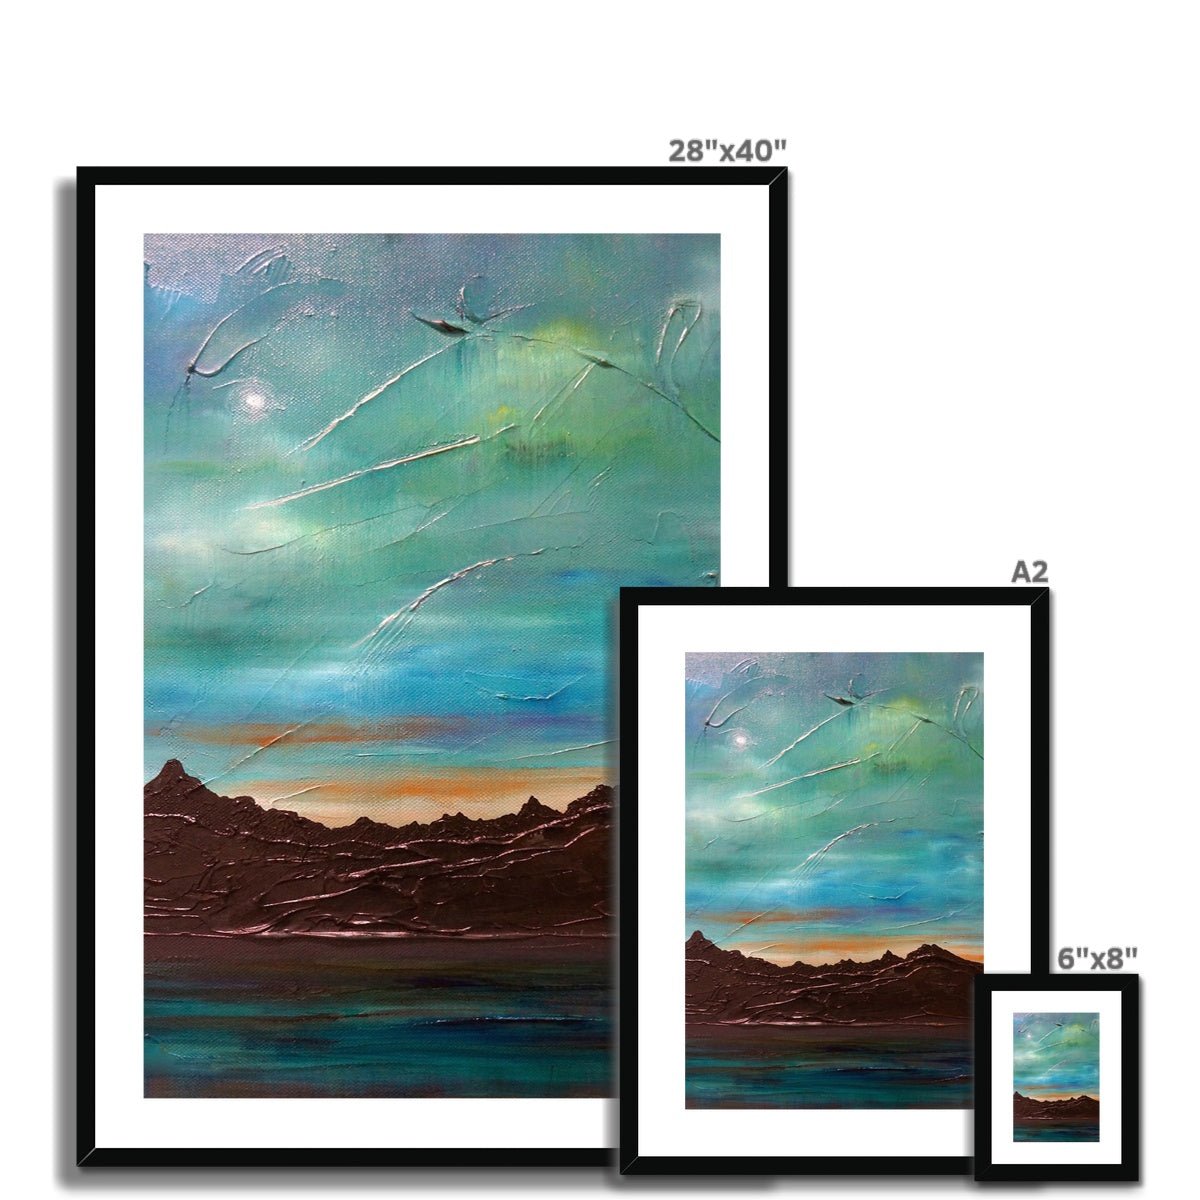 The Cuillin From Elgol Skye Painting | Framed & Mounted Prints From Scotland-Framed & Mounted Prints-Skye Art Gallery-Paintings, Prints, Homeware, Art Gifts From Scotland By Scottish Artist Kevin Hunter